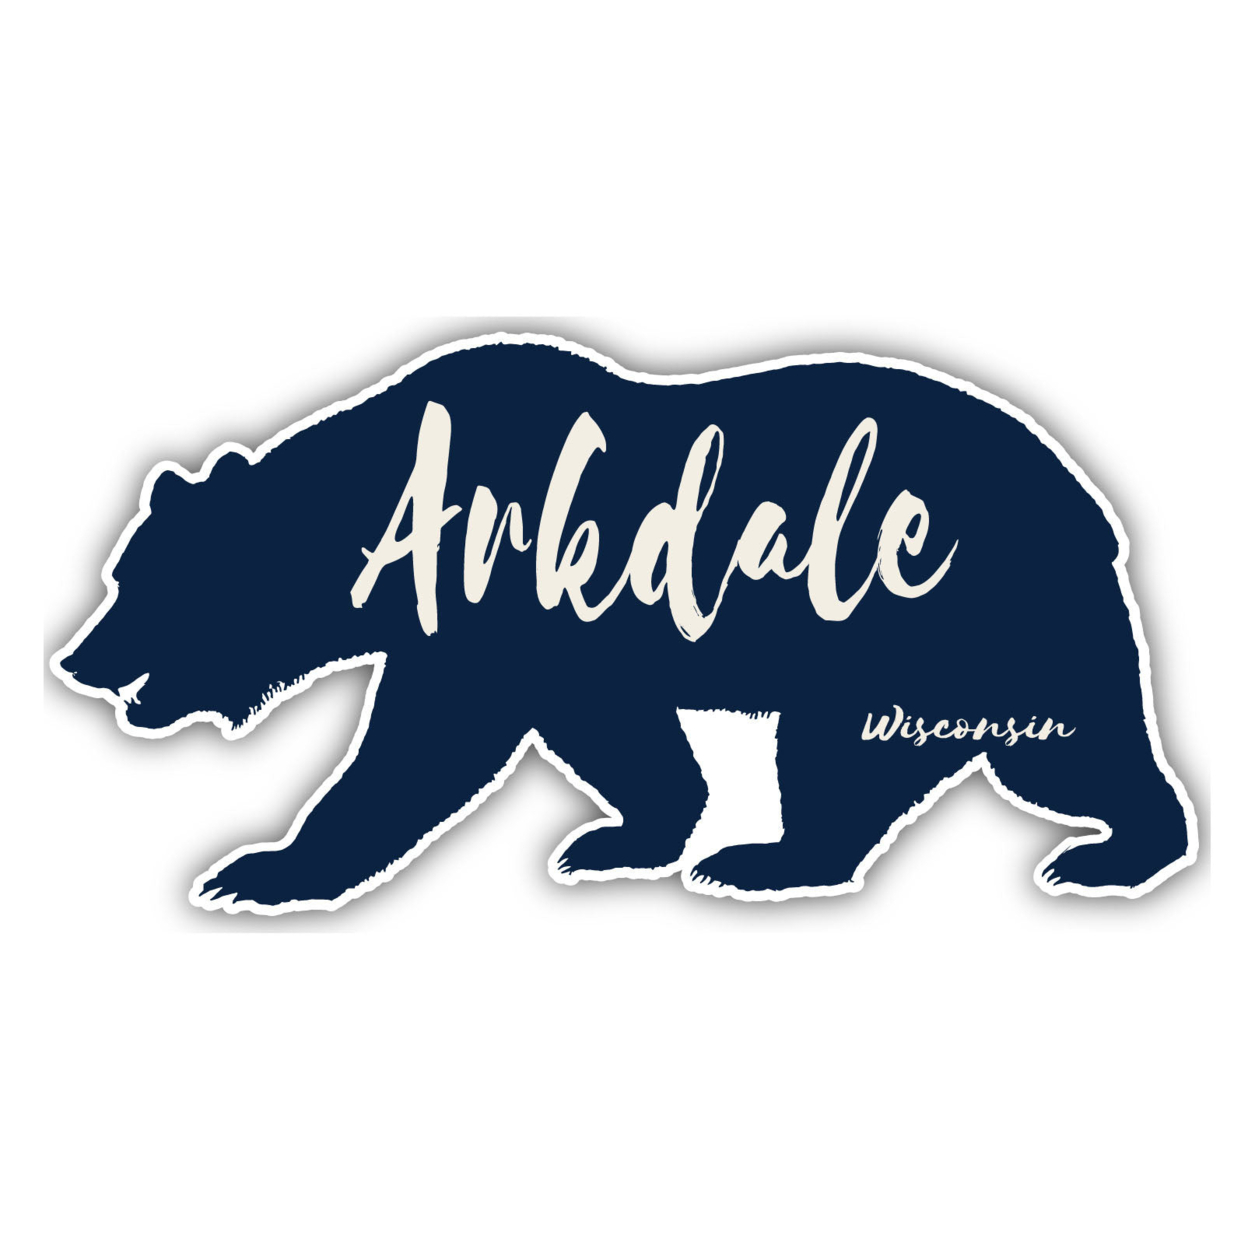 Arkdale Wisconsin Souvenir Decorative Stickers (Choose Theme And Size) - Single Unit, 10-Inch, Bear